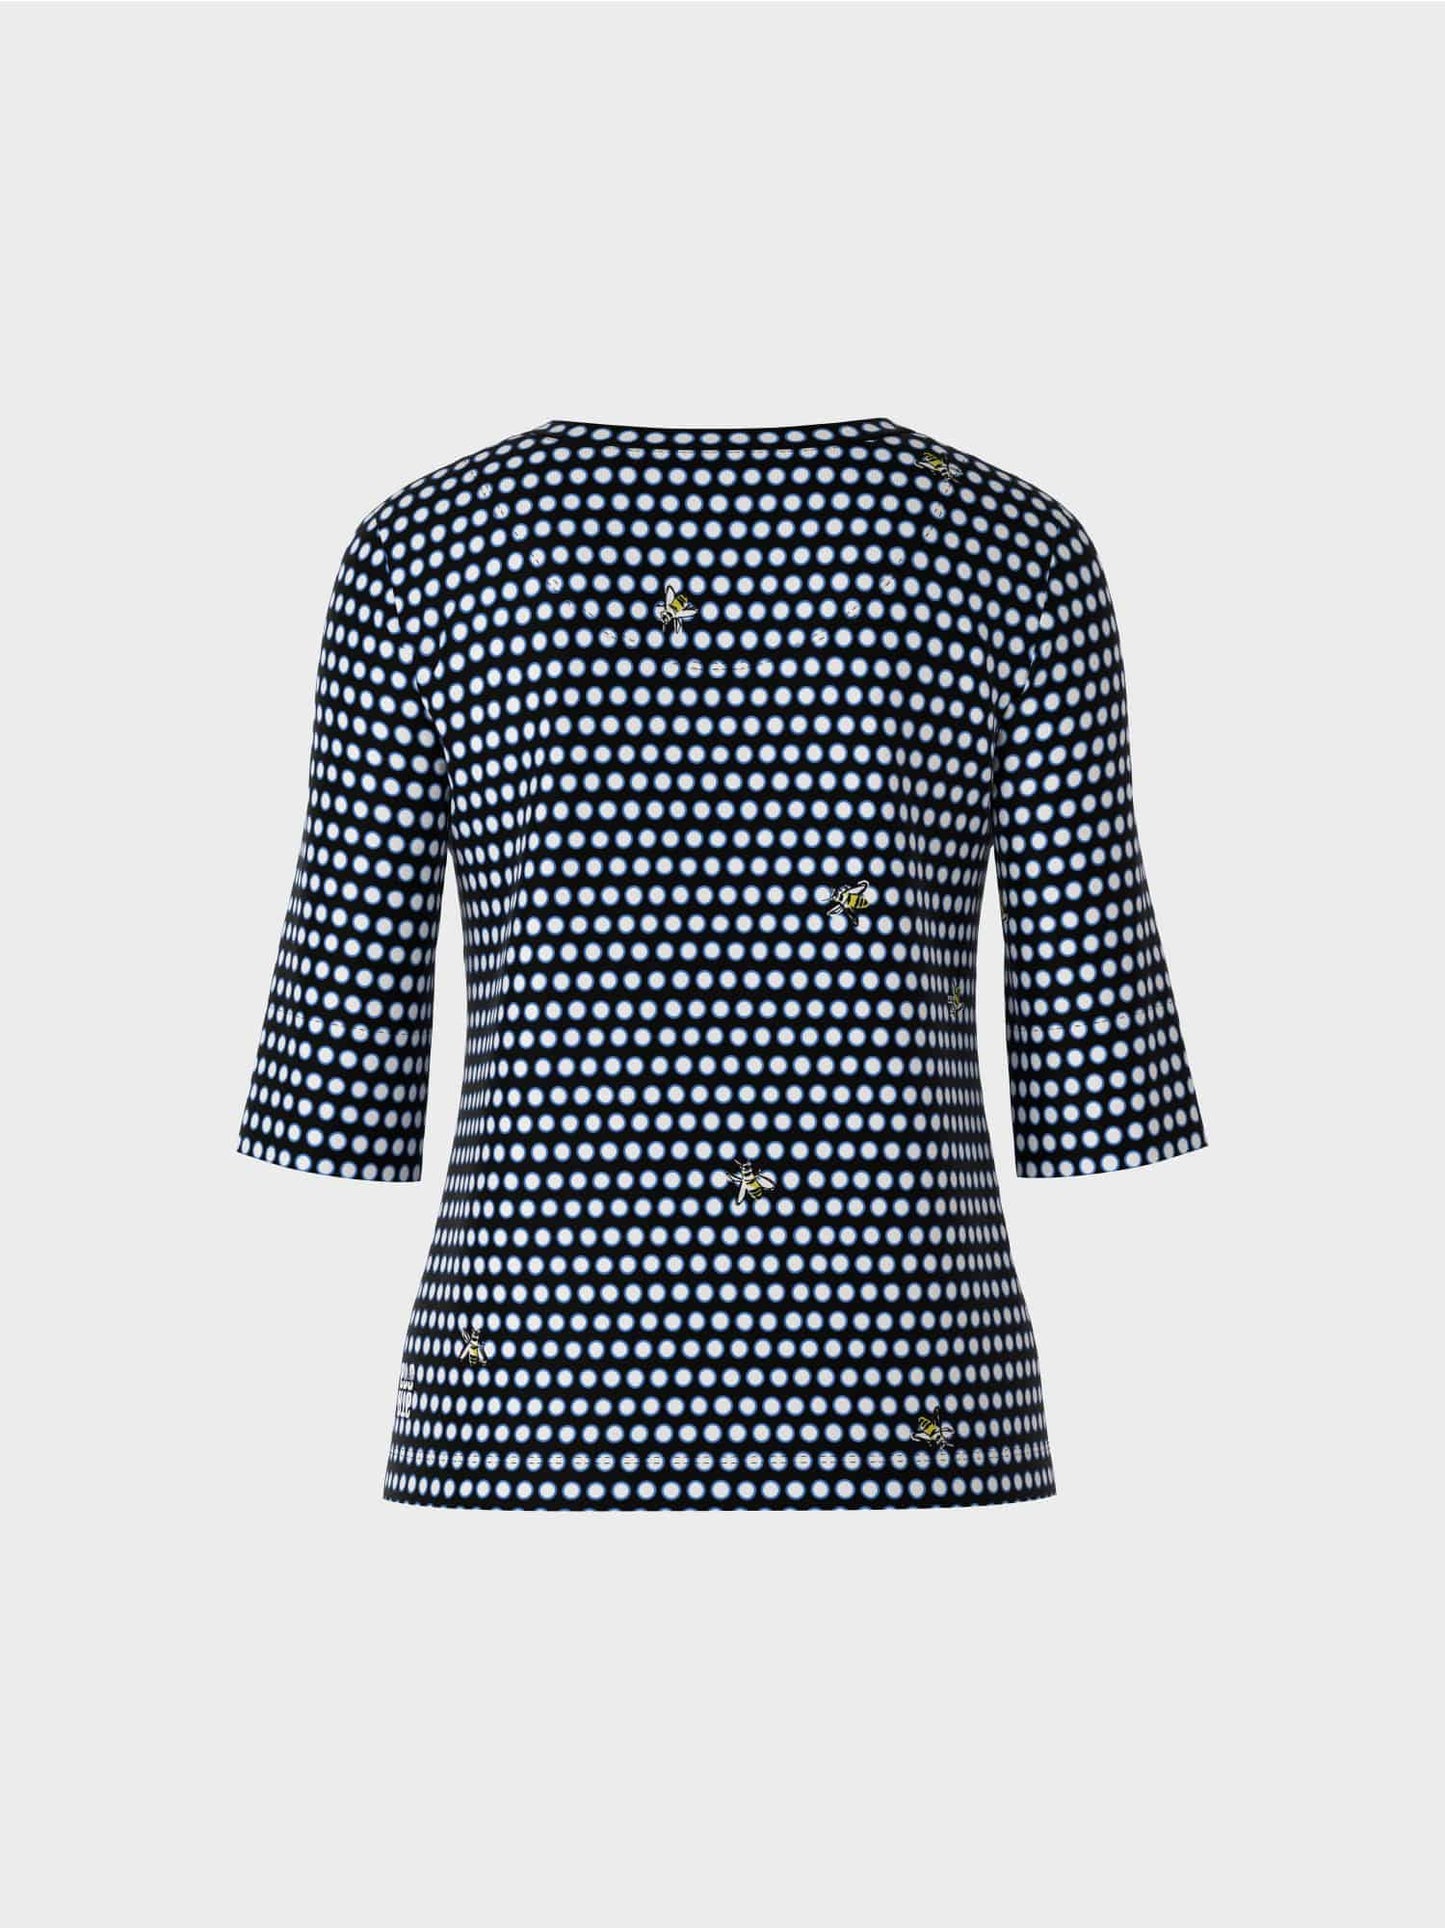 Top with Polka Dot Pattern